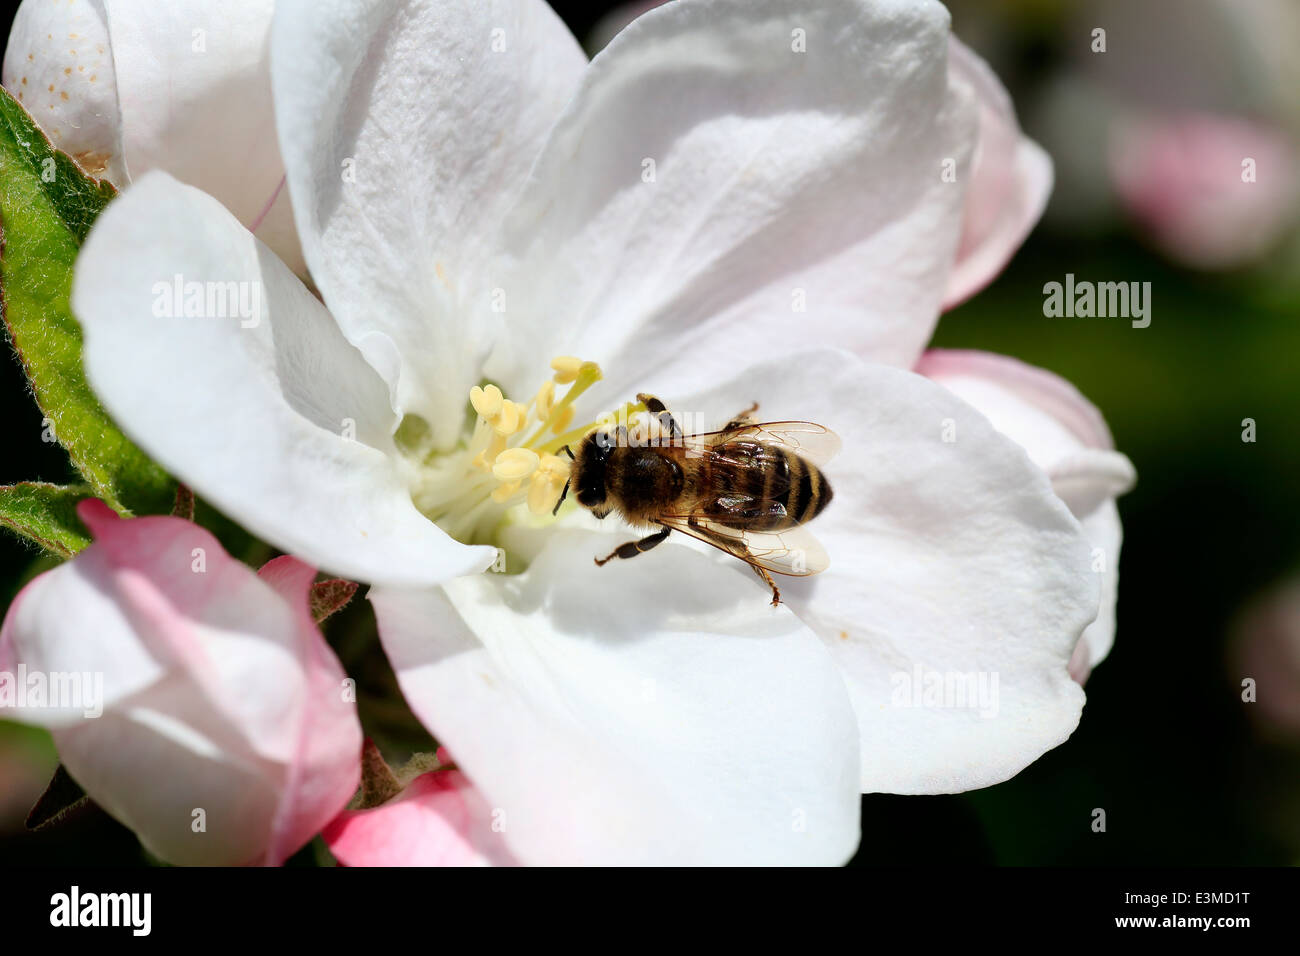 A honey bee Apis mellifera pollinating and receiving nectar from an apple tree flower in the Annapolis Valley of Nova Scotia, Canada Stock Photo